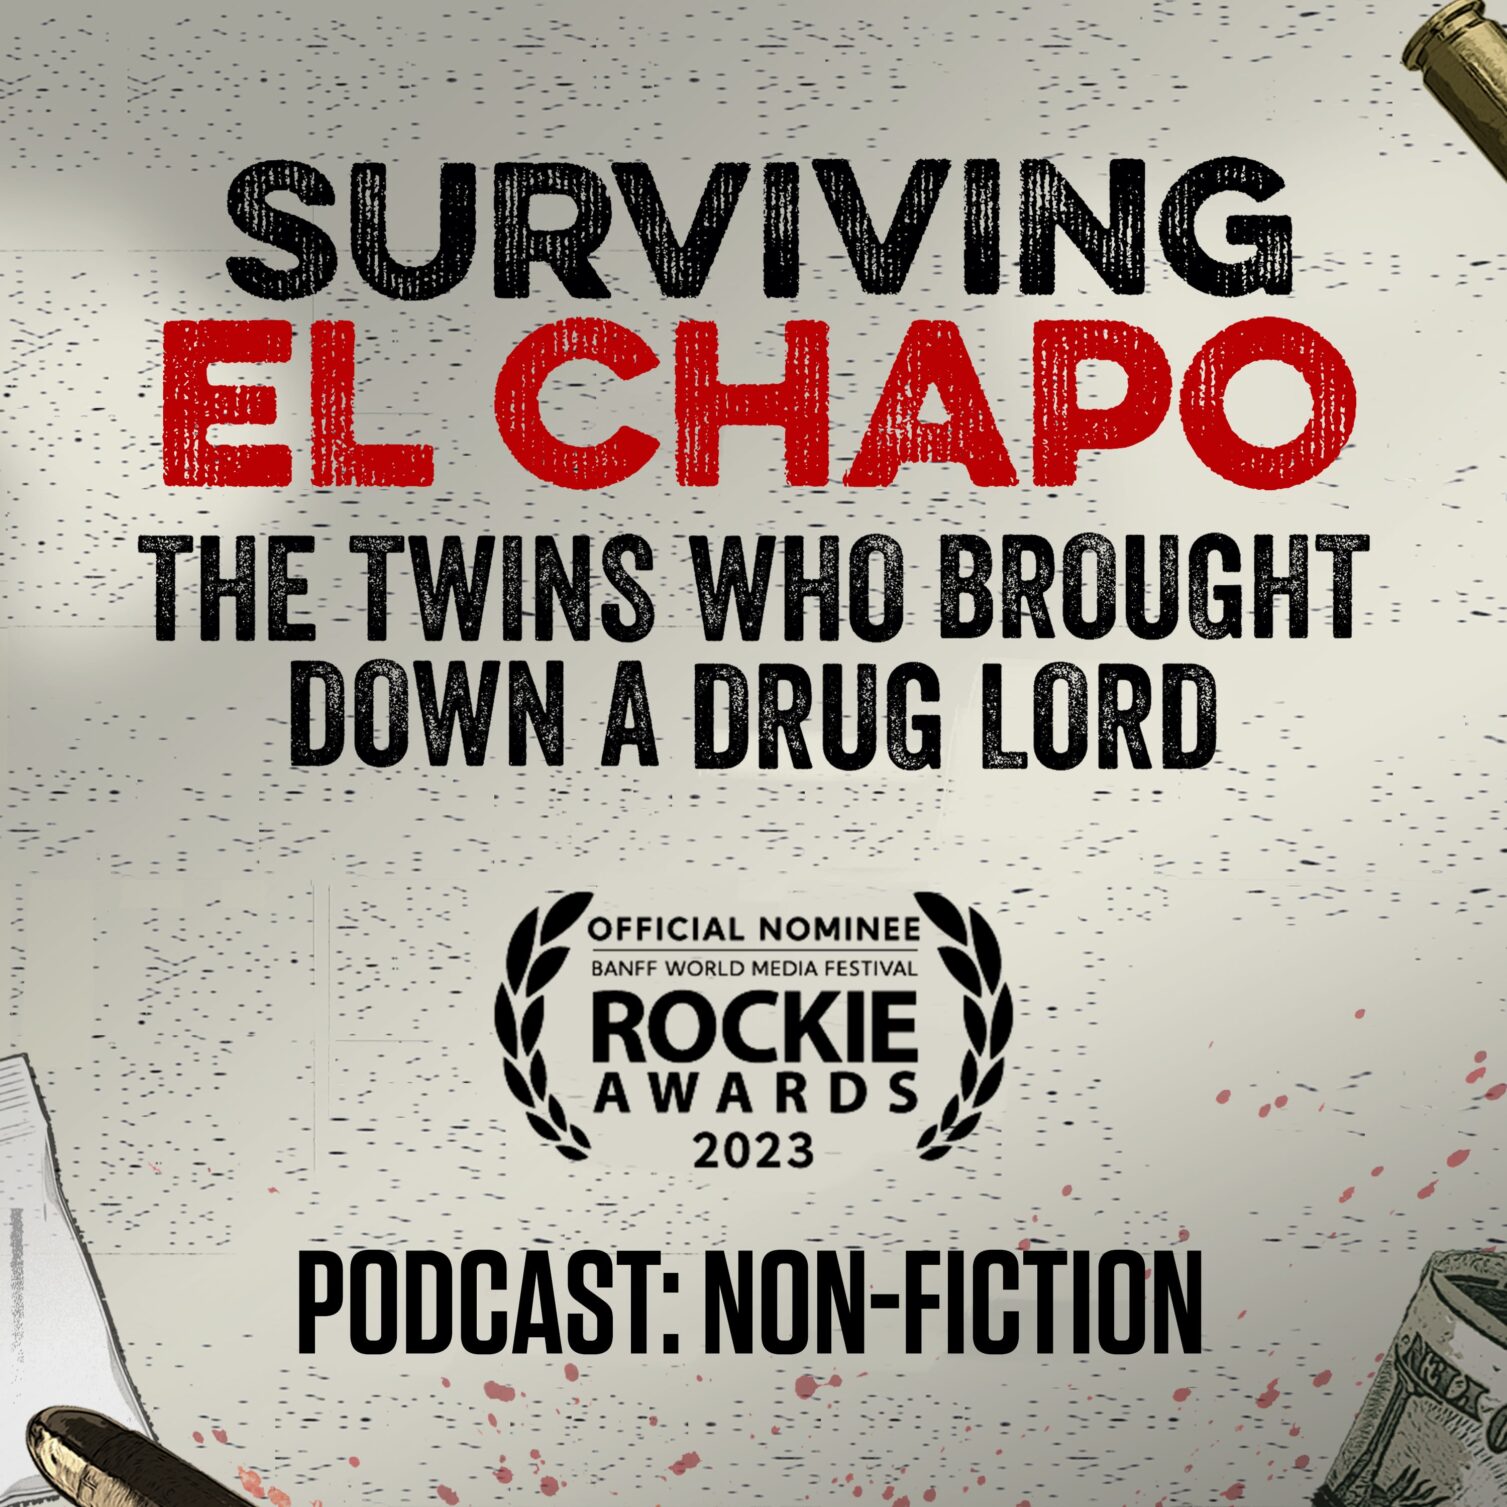 ‘Surviving El Chapo’ is Nominated for a Rockie Award